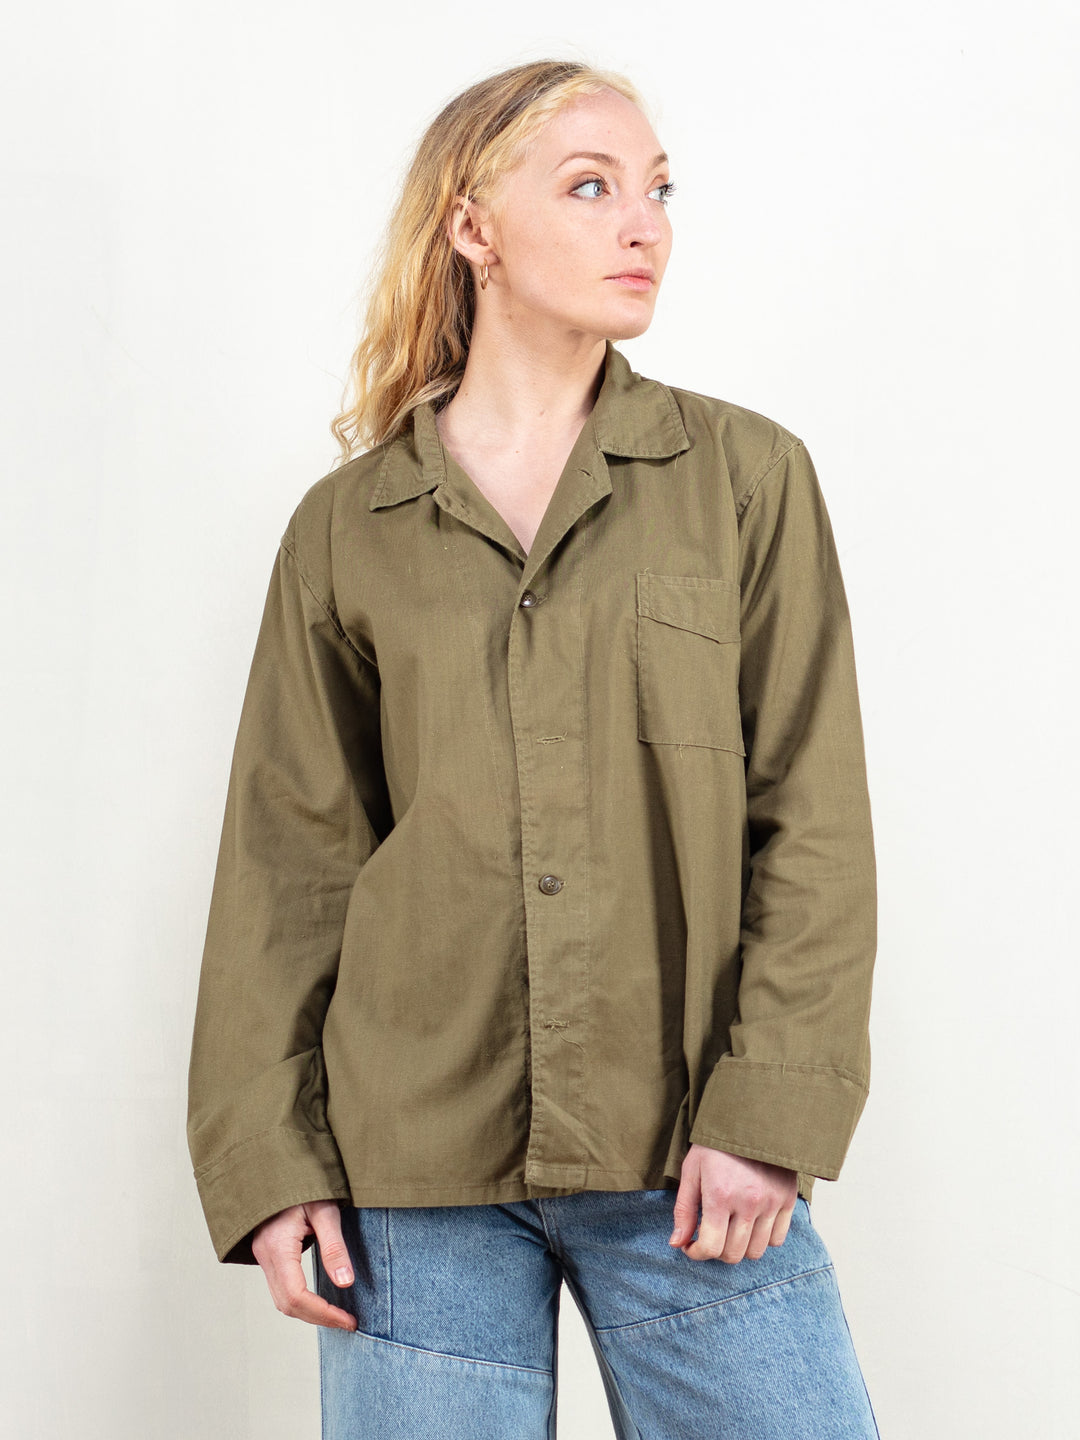 70s Military Shirt vintage olive drab cotton army shirt oversized 70s army shirt military vintage clothing northerngirlstore size large